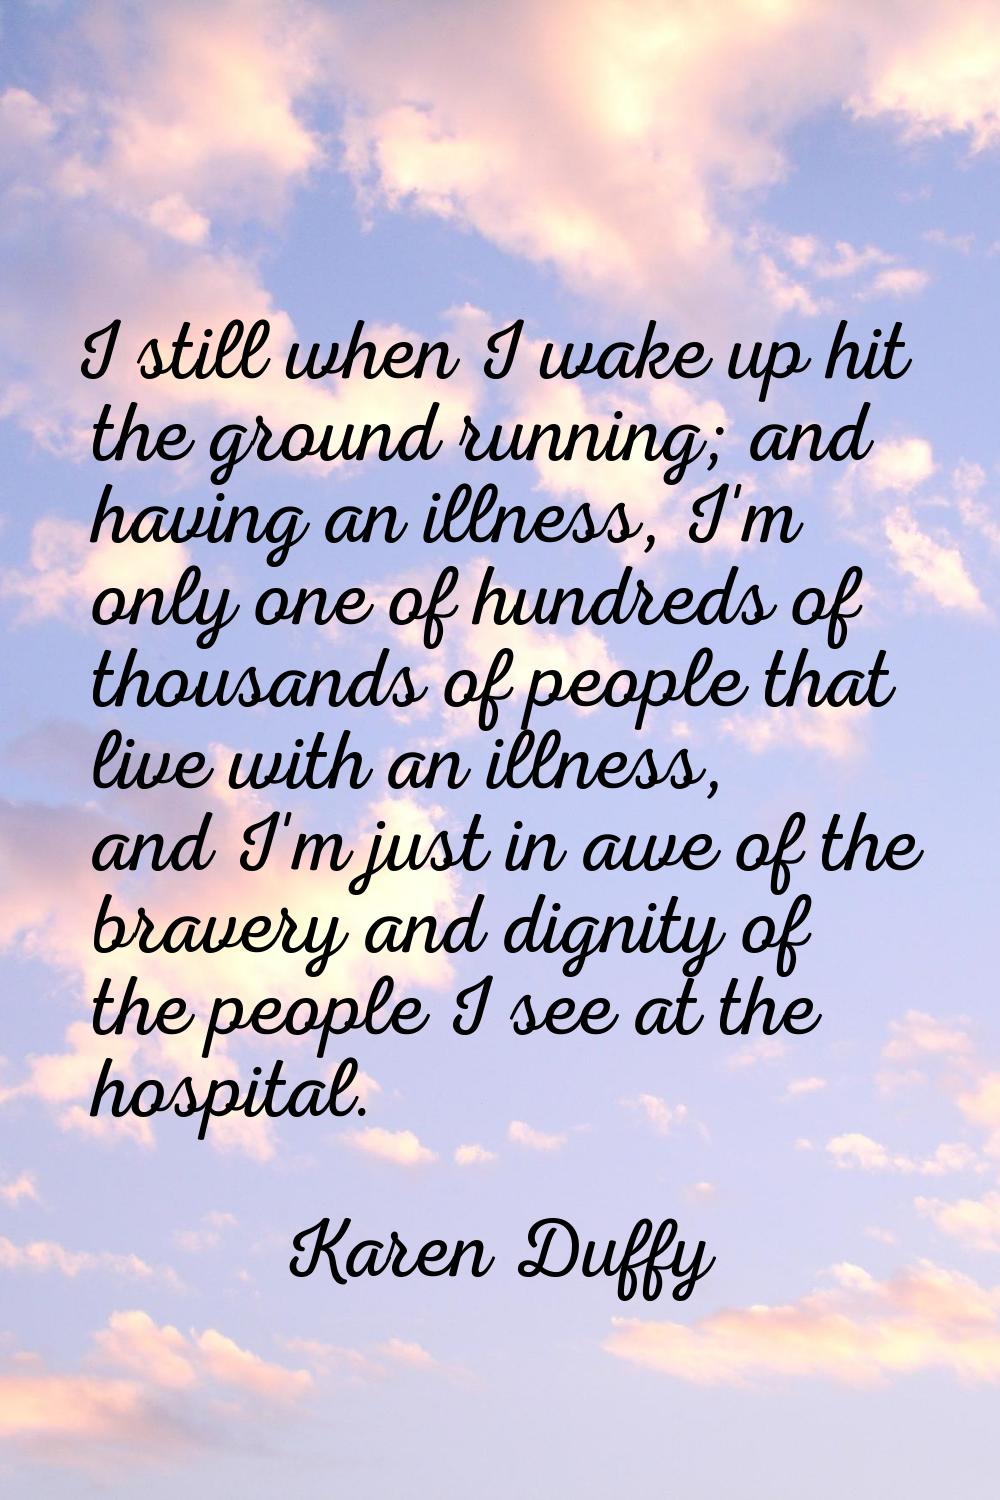 I still when I wake up hit the ground running; and having an illness, I'm only one of hundreds of t